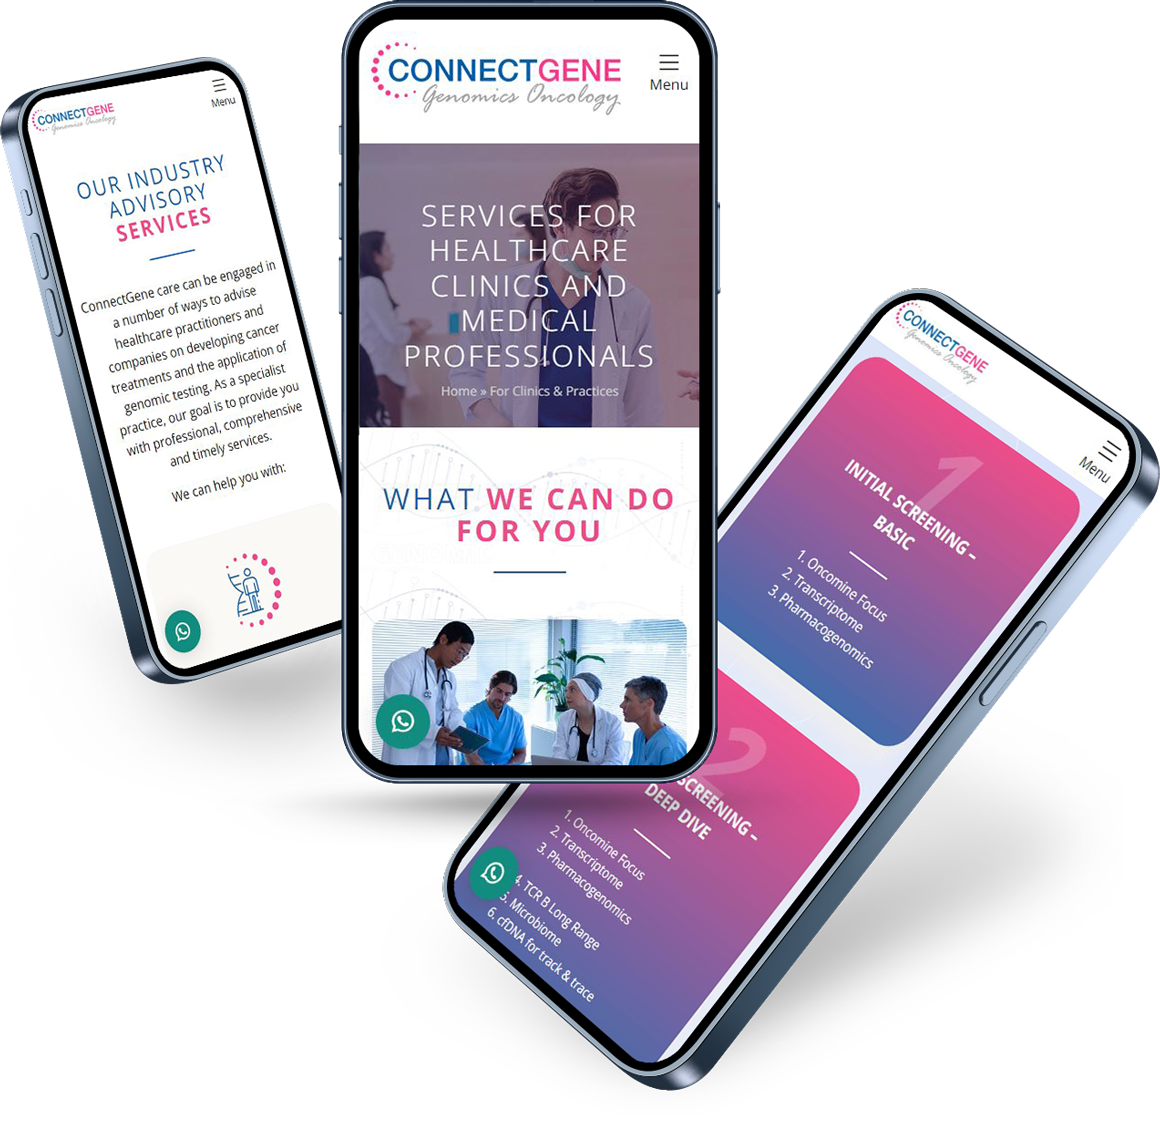 connect gene cg mobile